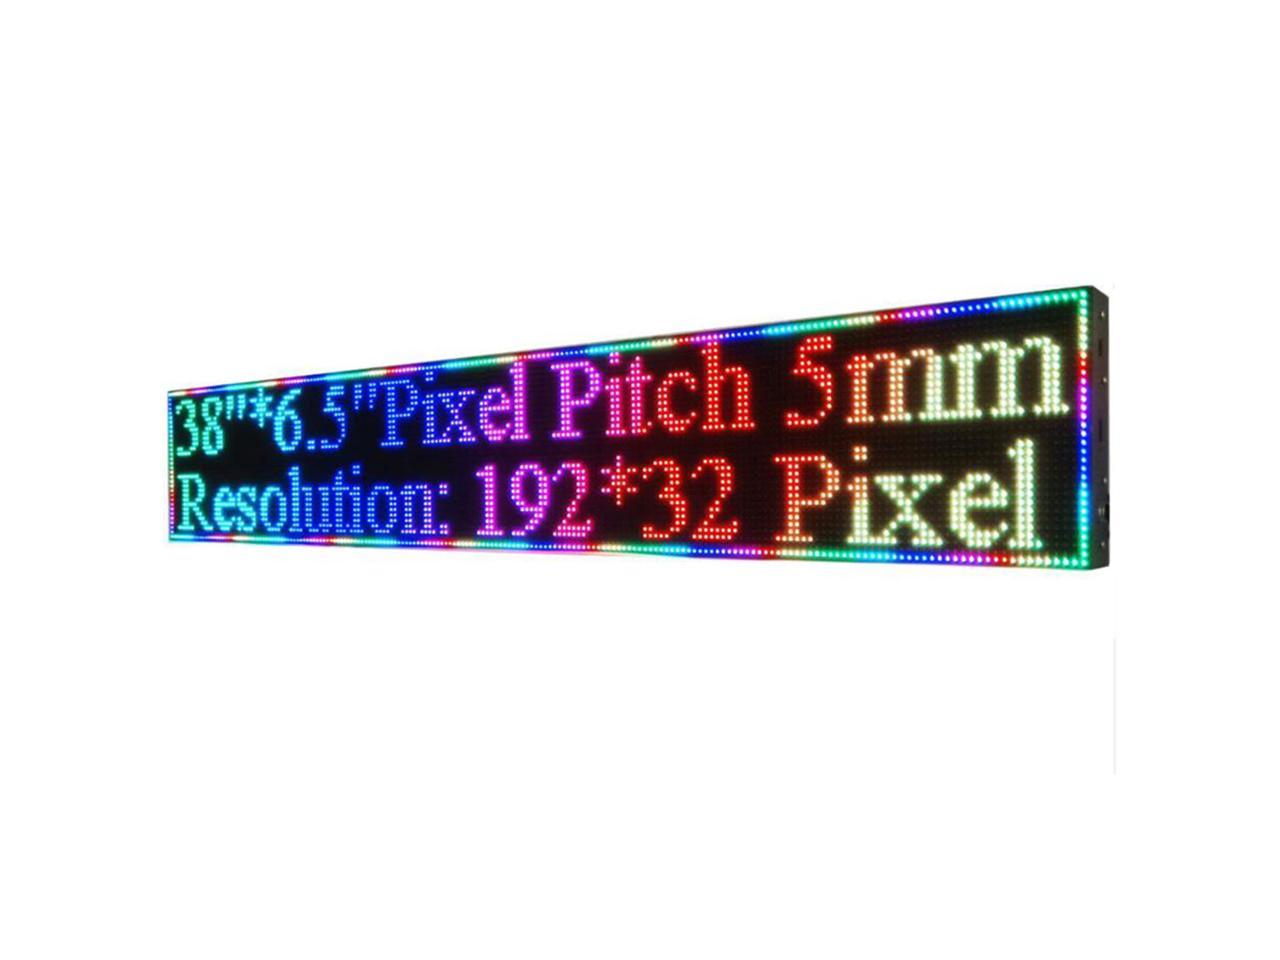 Indoor P5 Full Color LED Sign 25x 6.5 Programmable Scrolling Display Message Board 